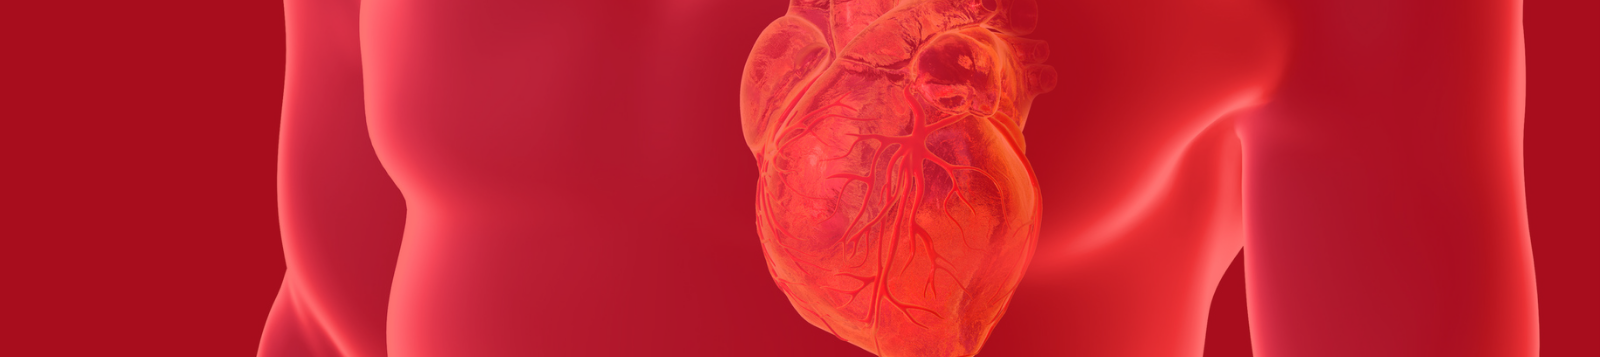 cardiology-banner-image-2.png